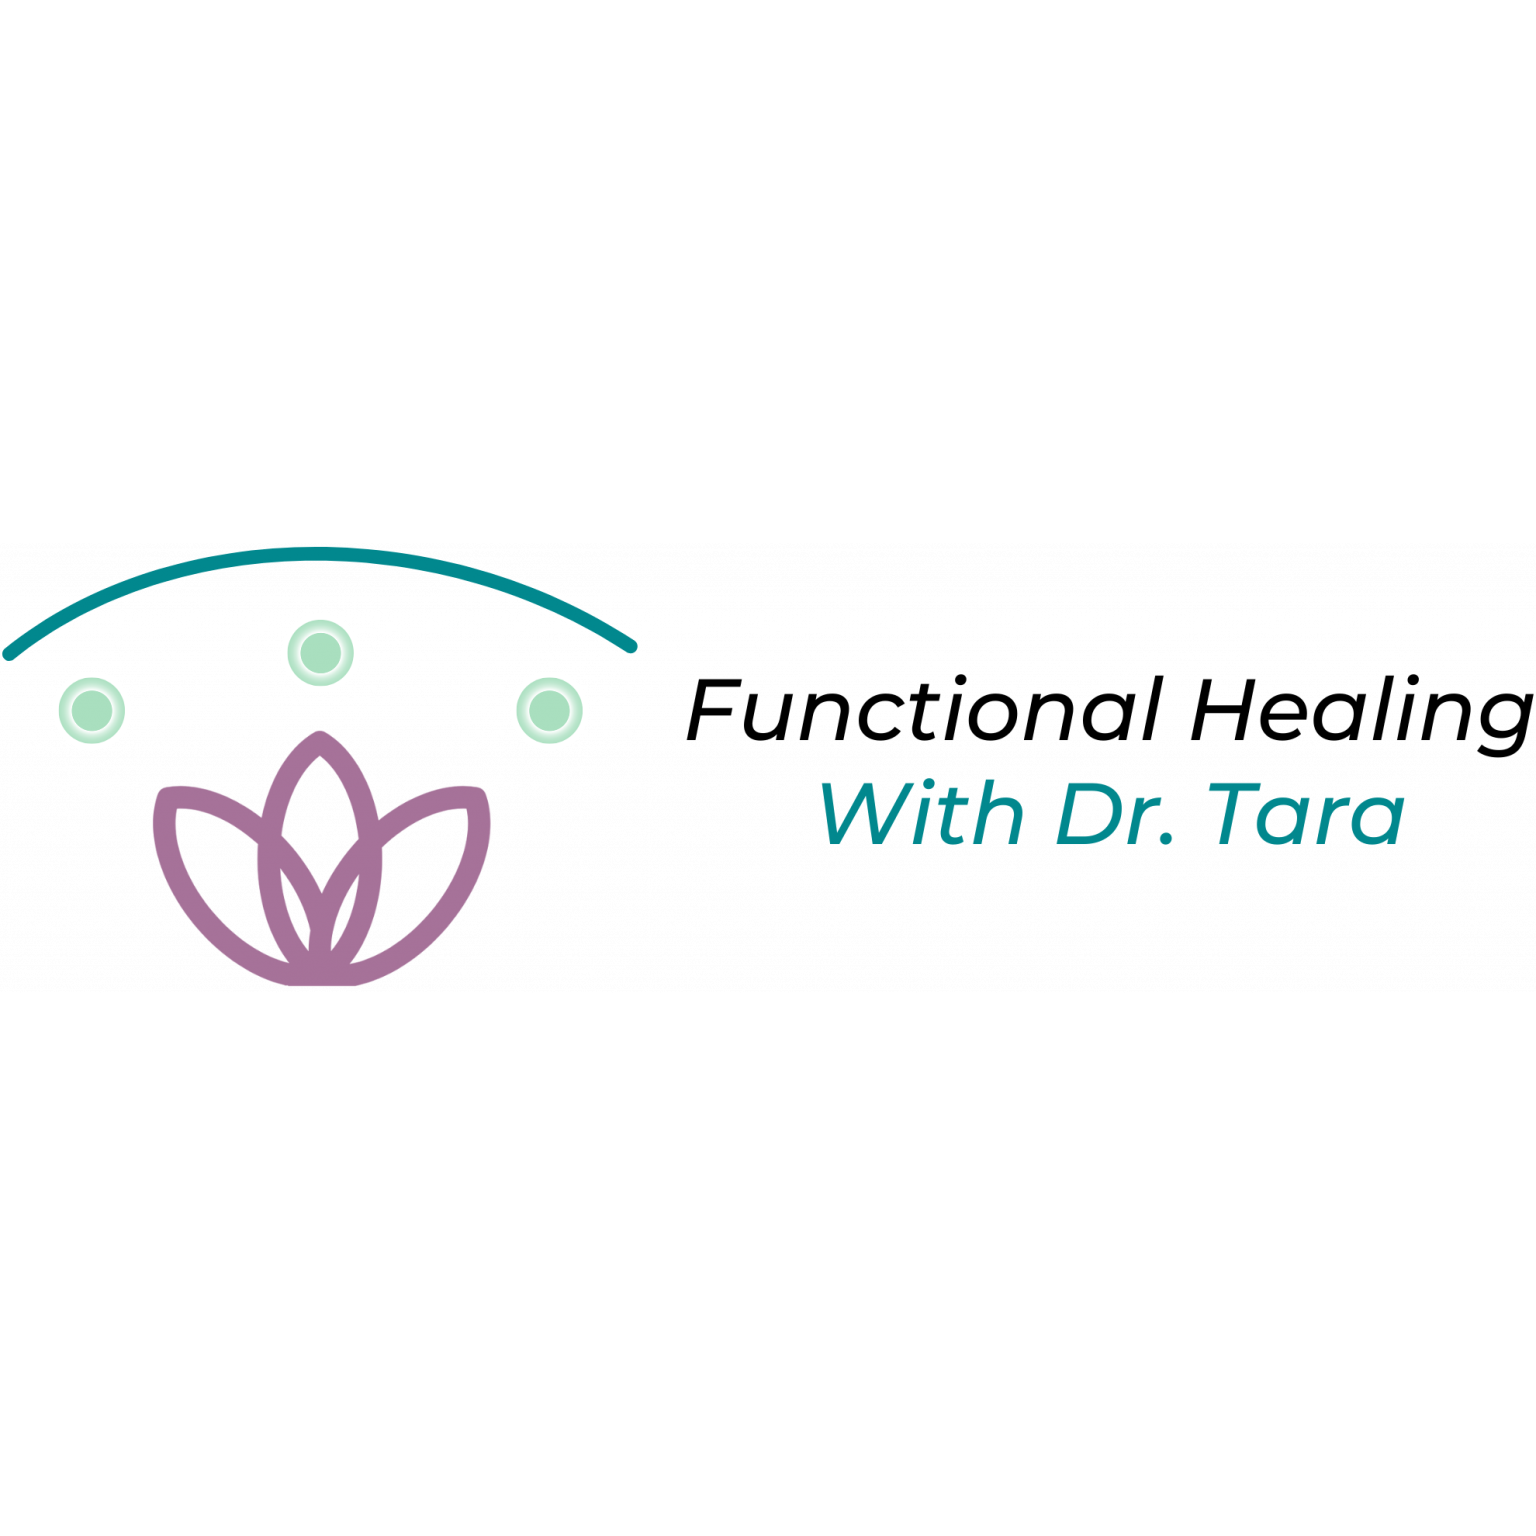 Functional Healing with Dr. Tara - Fort Collins, CO 80525 - (970)698-7545 | ShowMeLocal.com